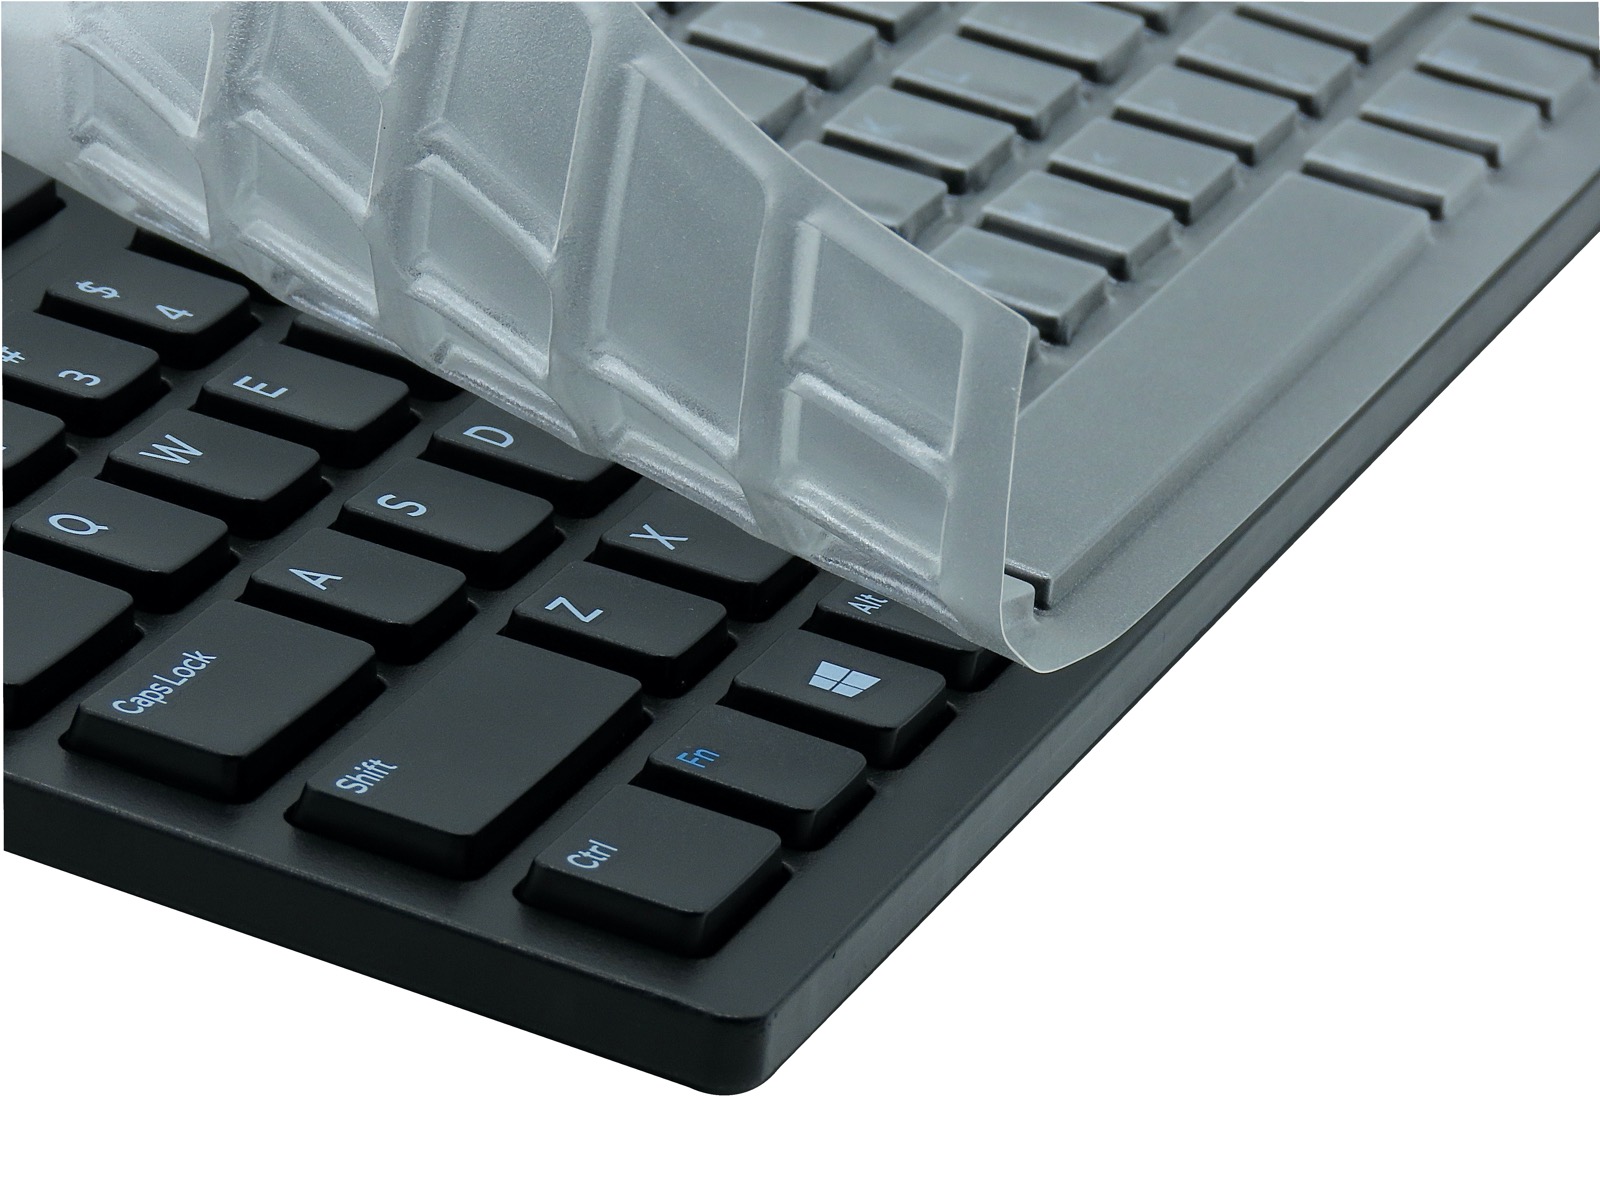 EasySwap Frame and Cover for DELL KB216 Keyboard